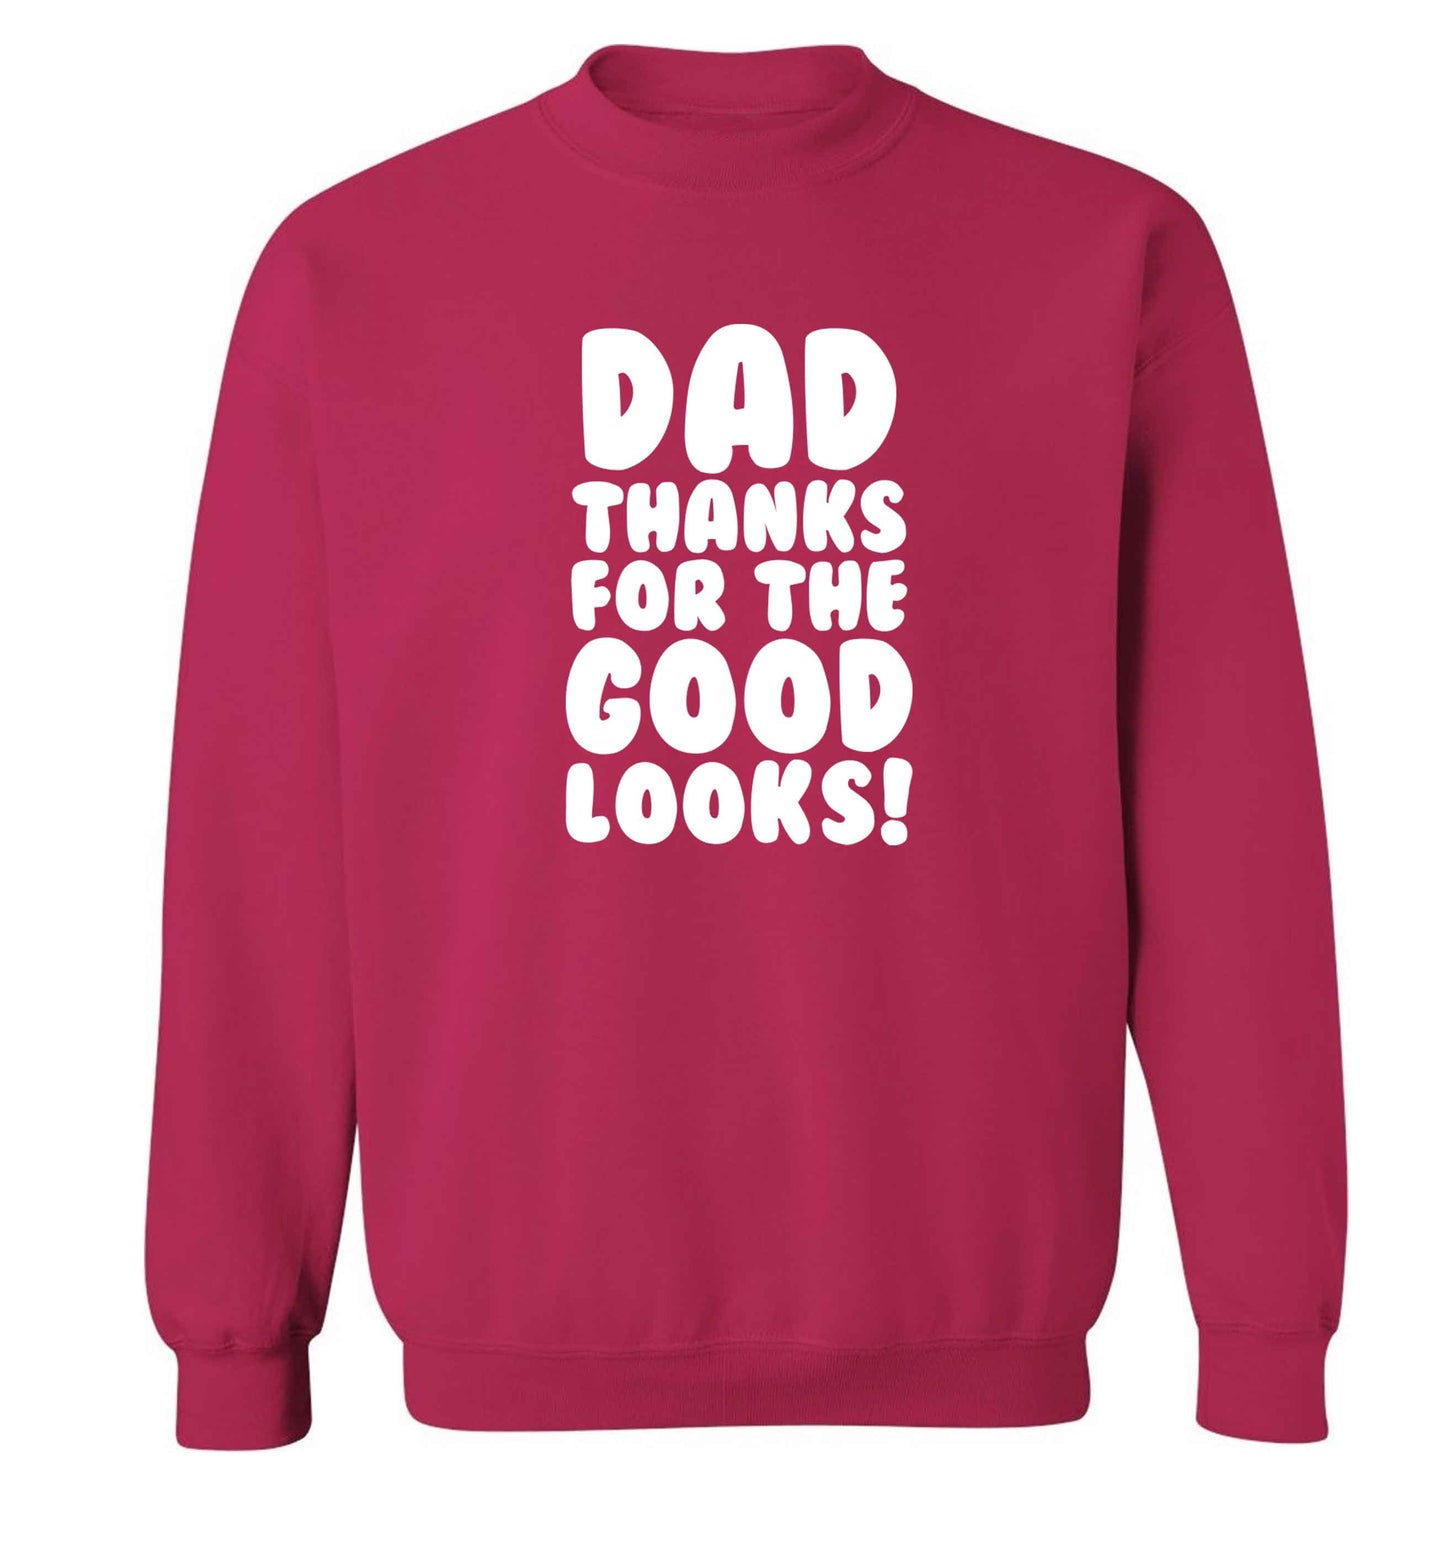 Dad thanks for the good looks adult's unisex pink sweater 2XL